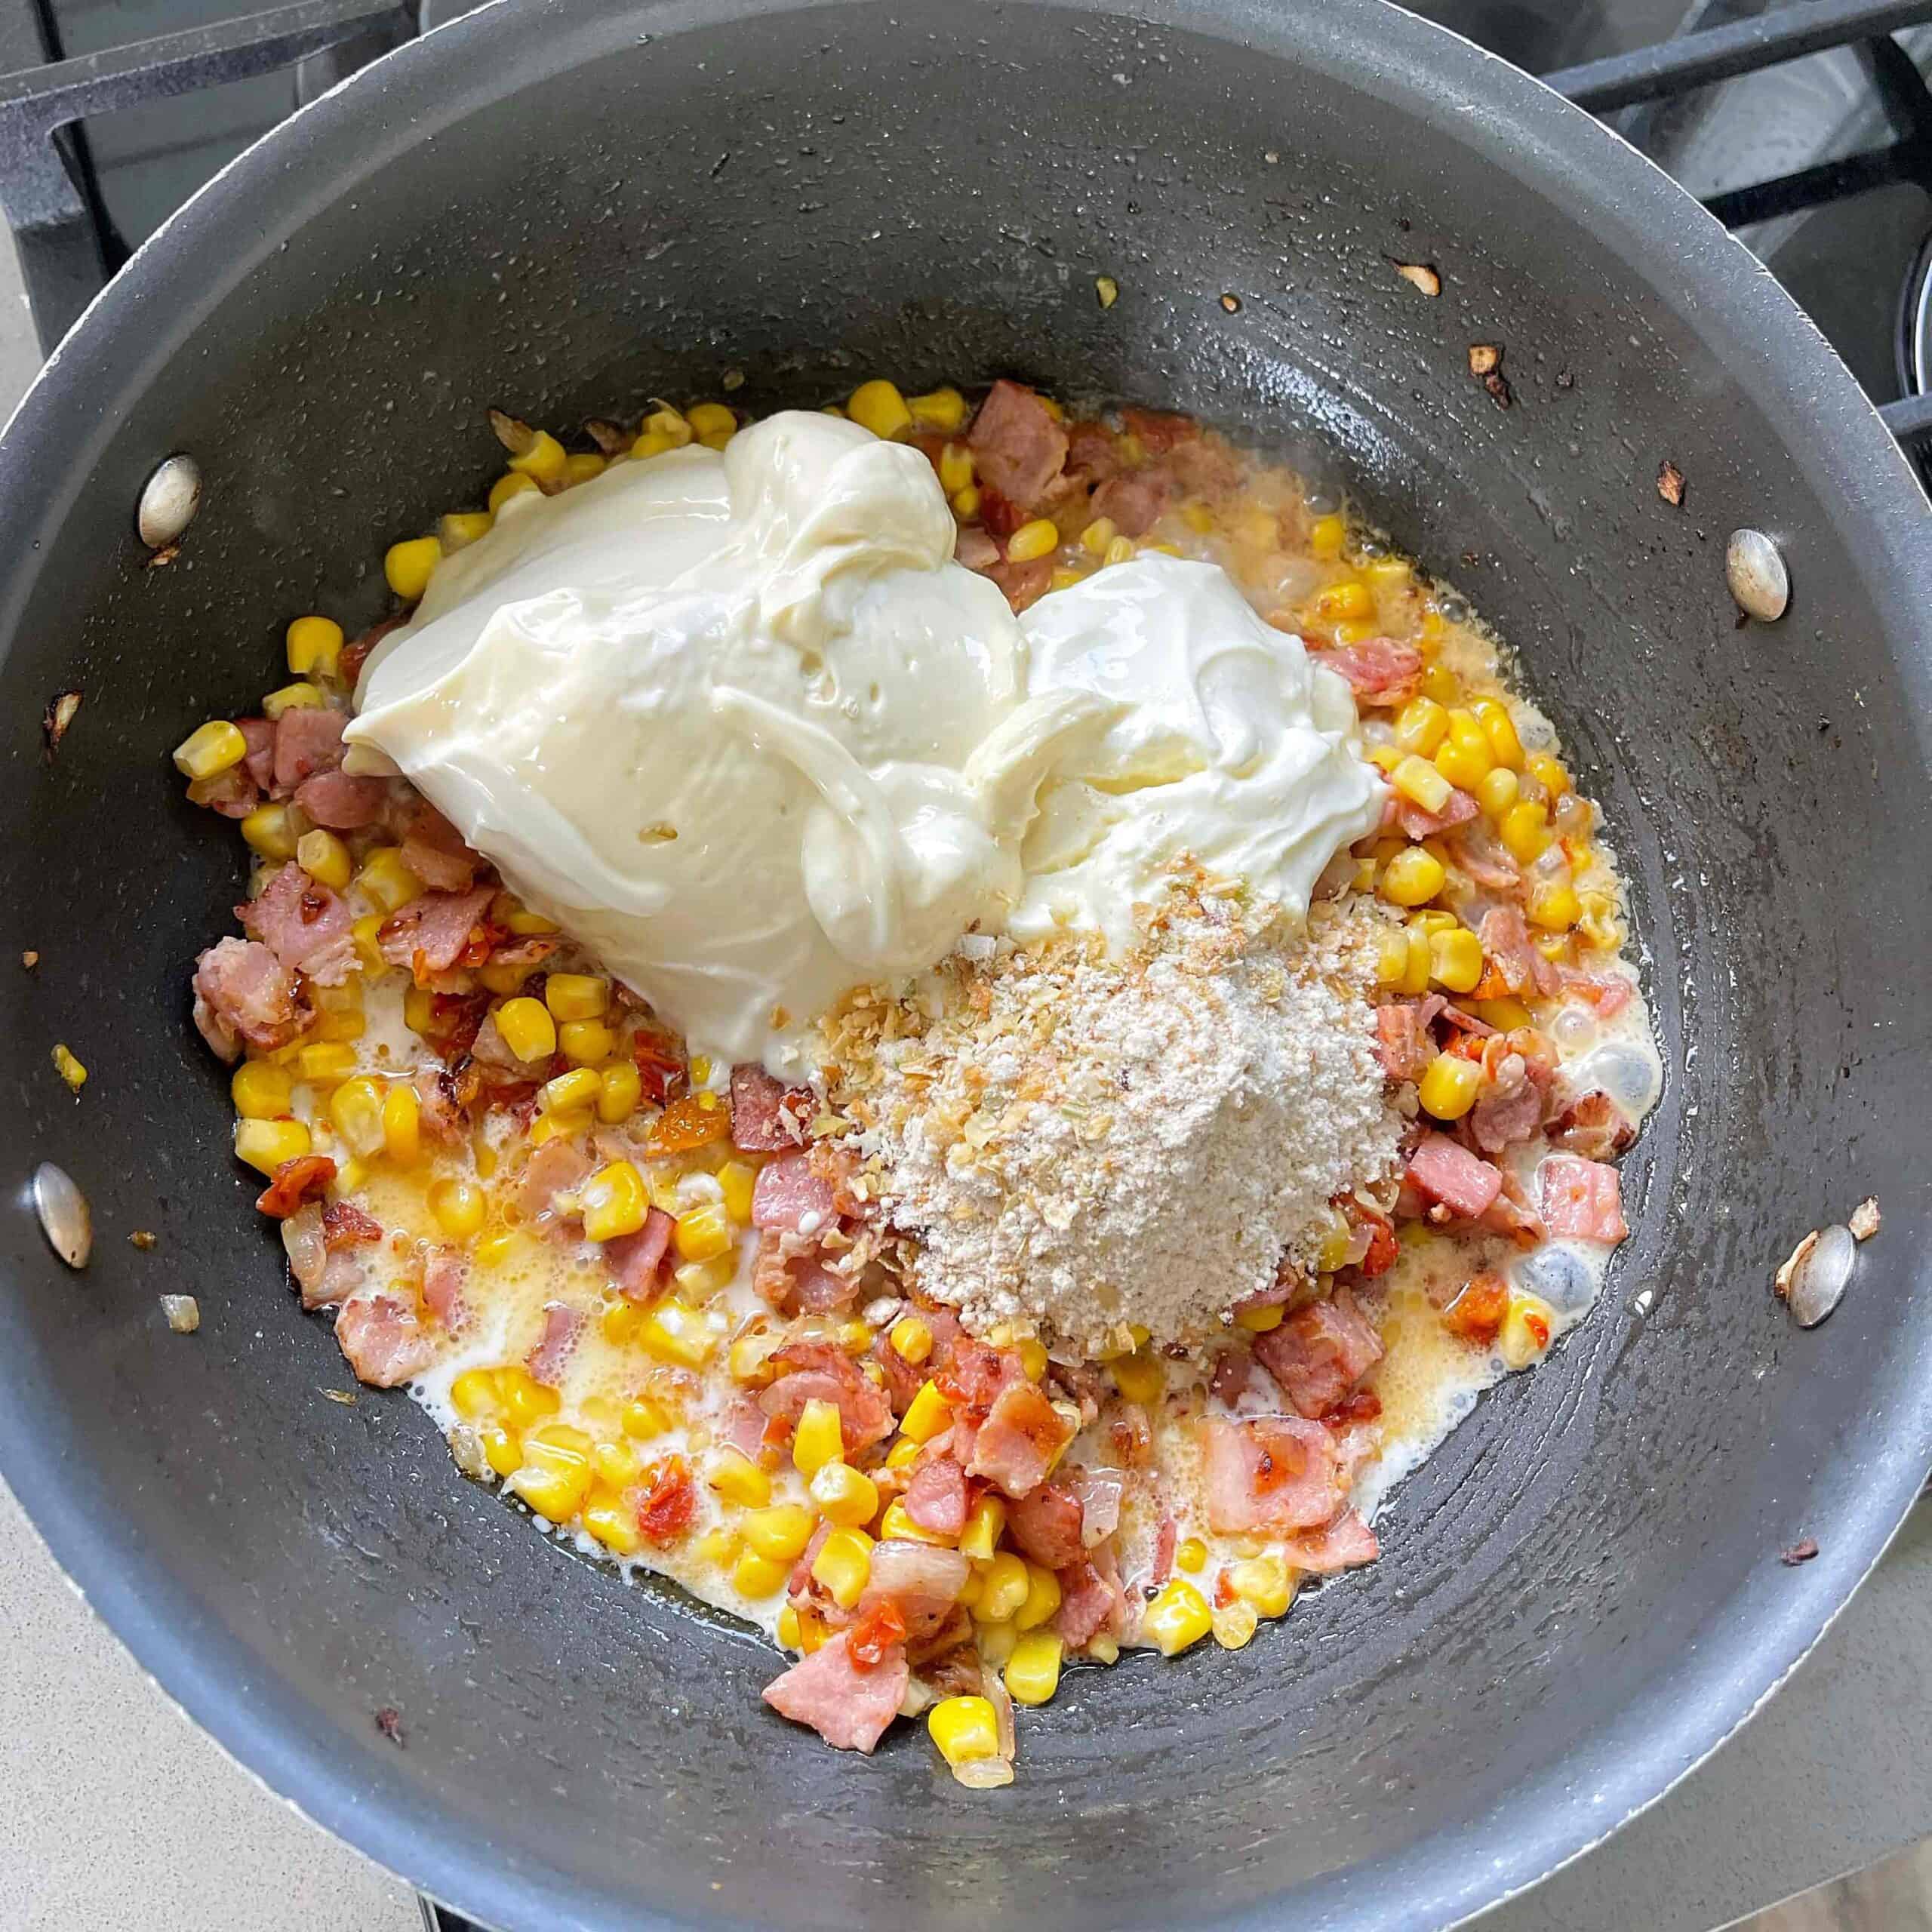 Bacon, corn and sour cream in a large frying pan.